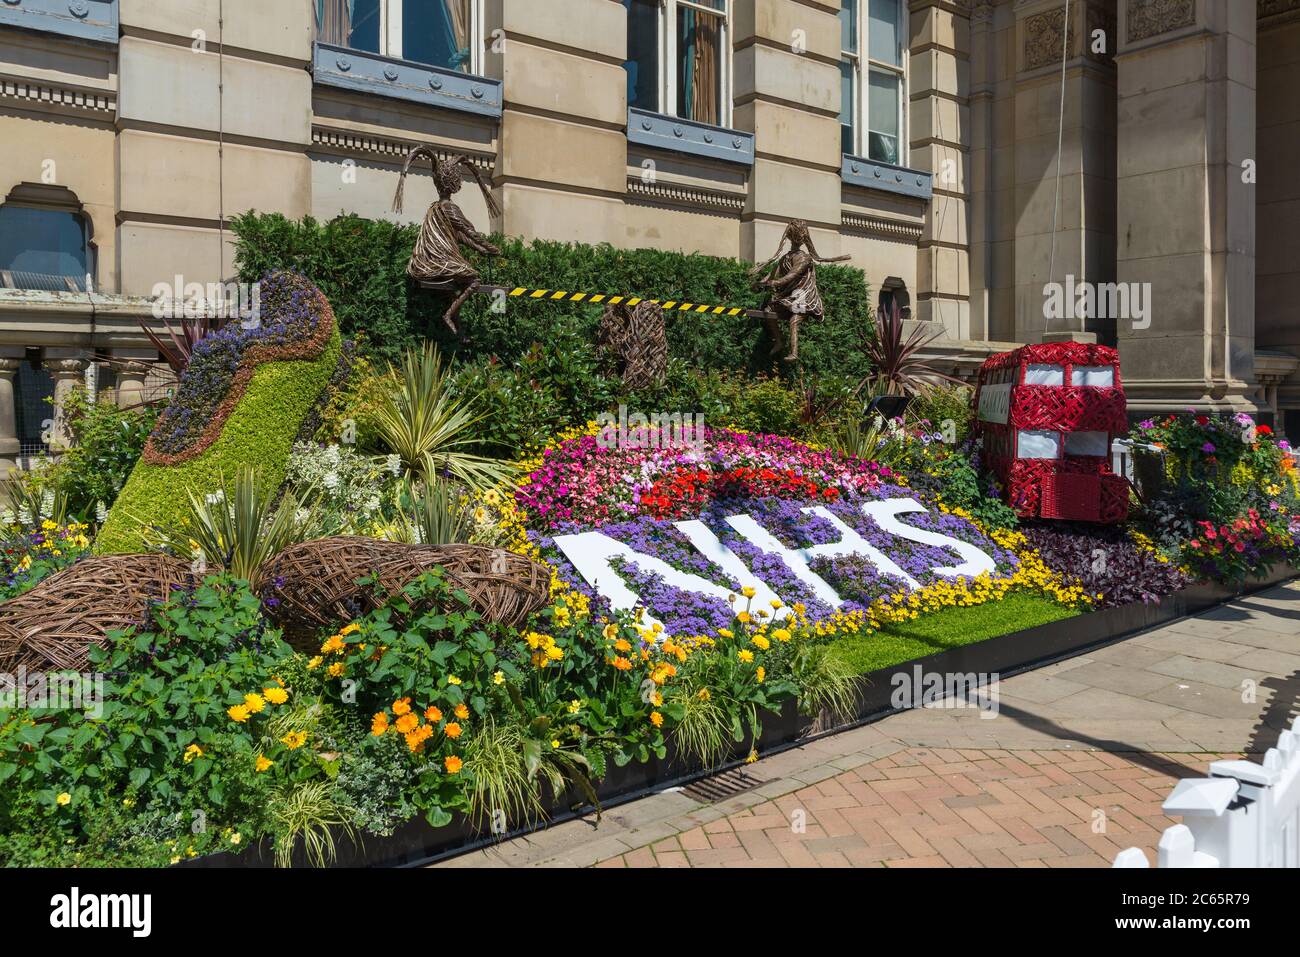 Flower display in Birmingham saying thank-you NHS which used plants destined for the Chelsea Flower Show by Birmingham Parks Department Stock Photo